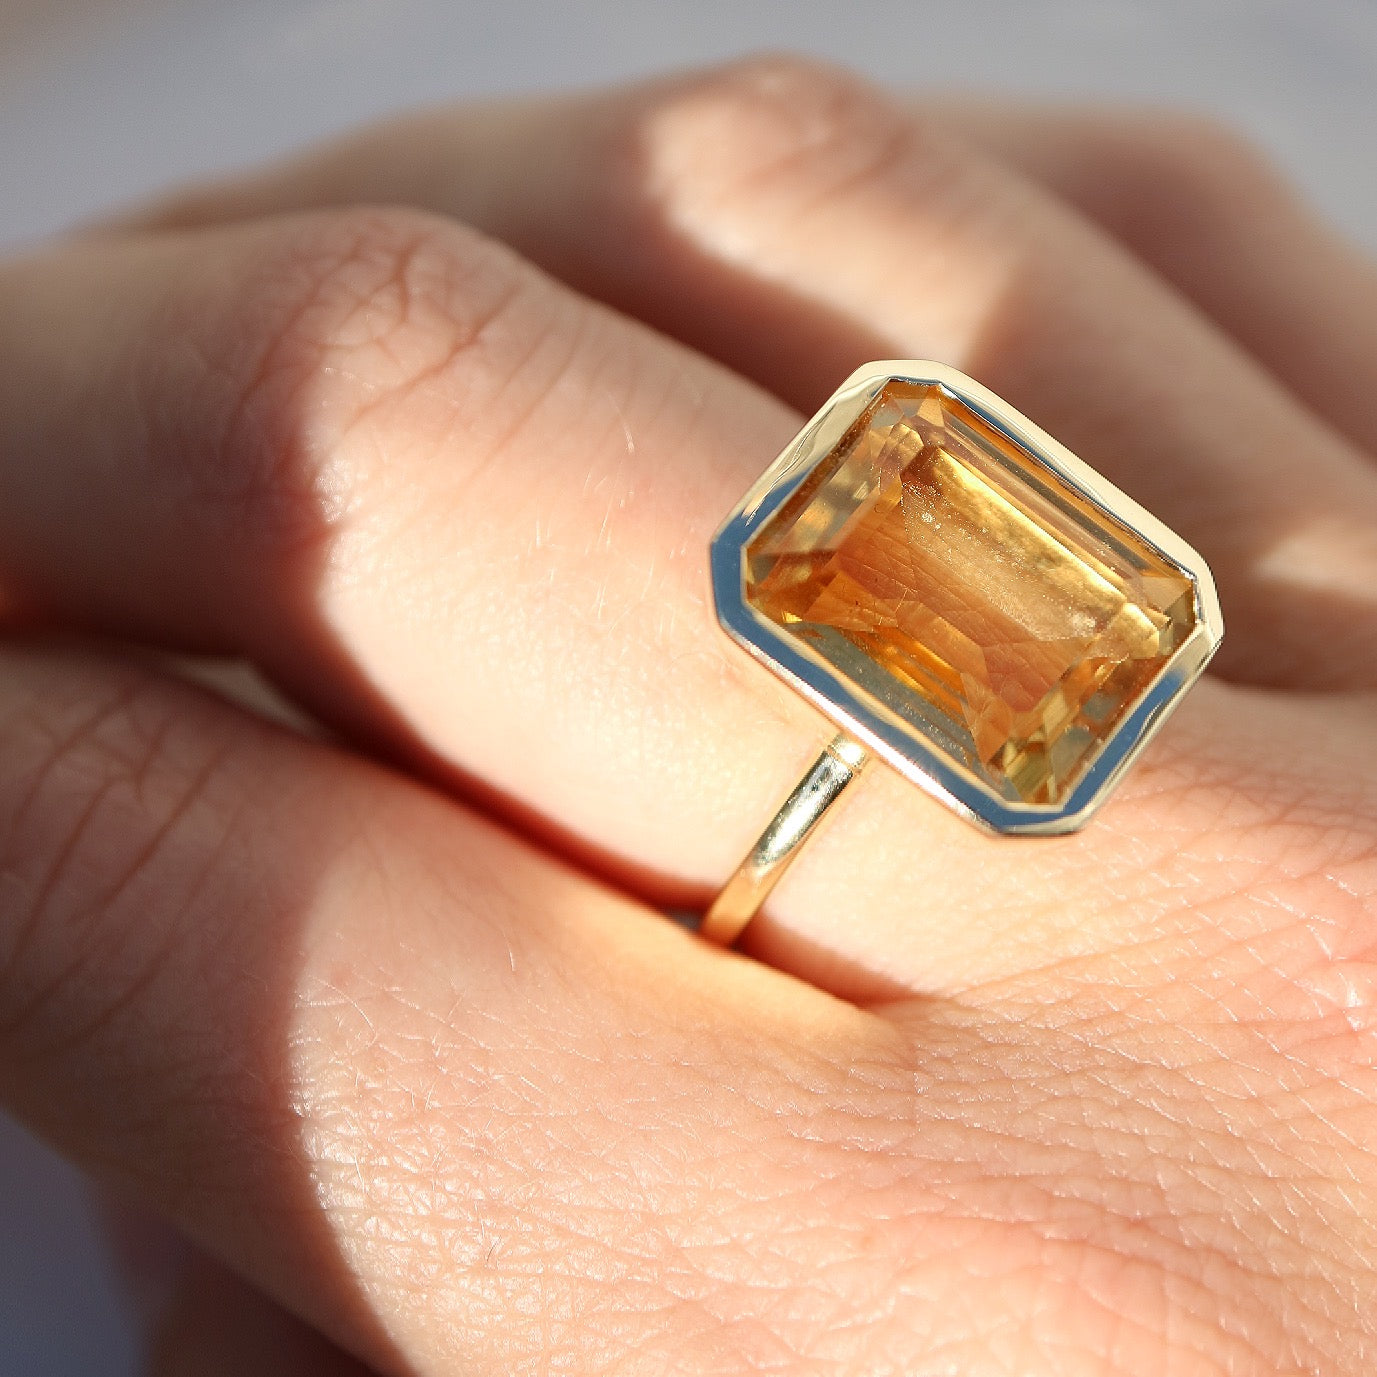 9ct gold ring with large citrine gemstone